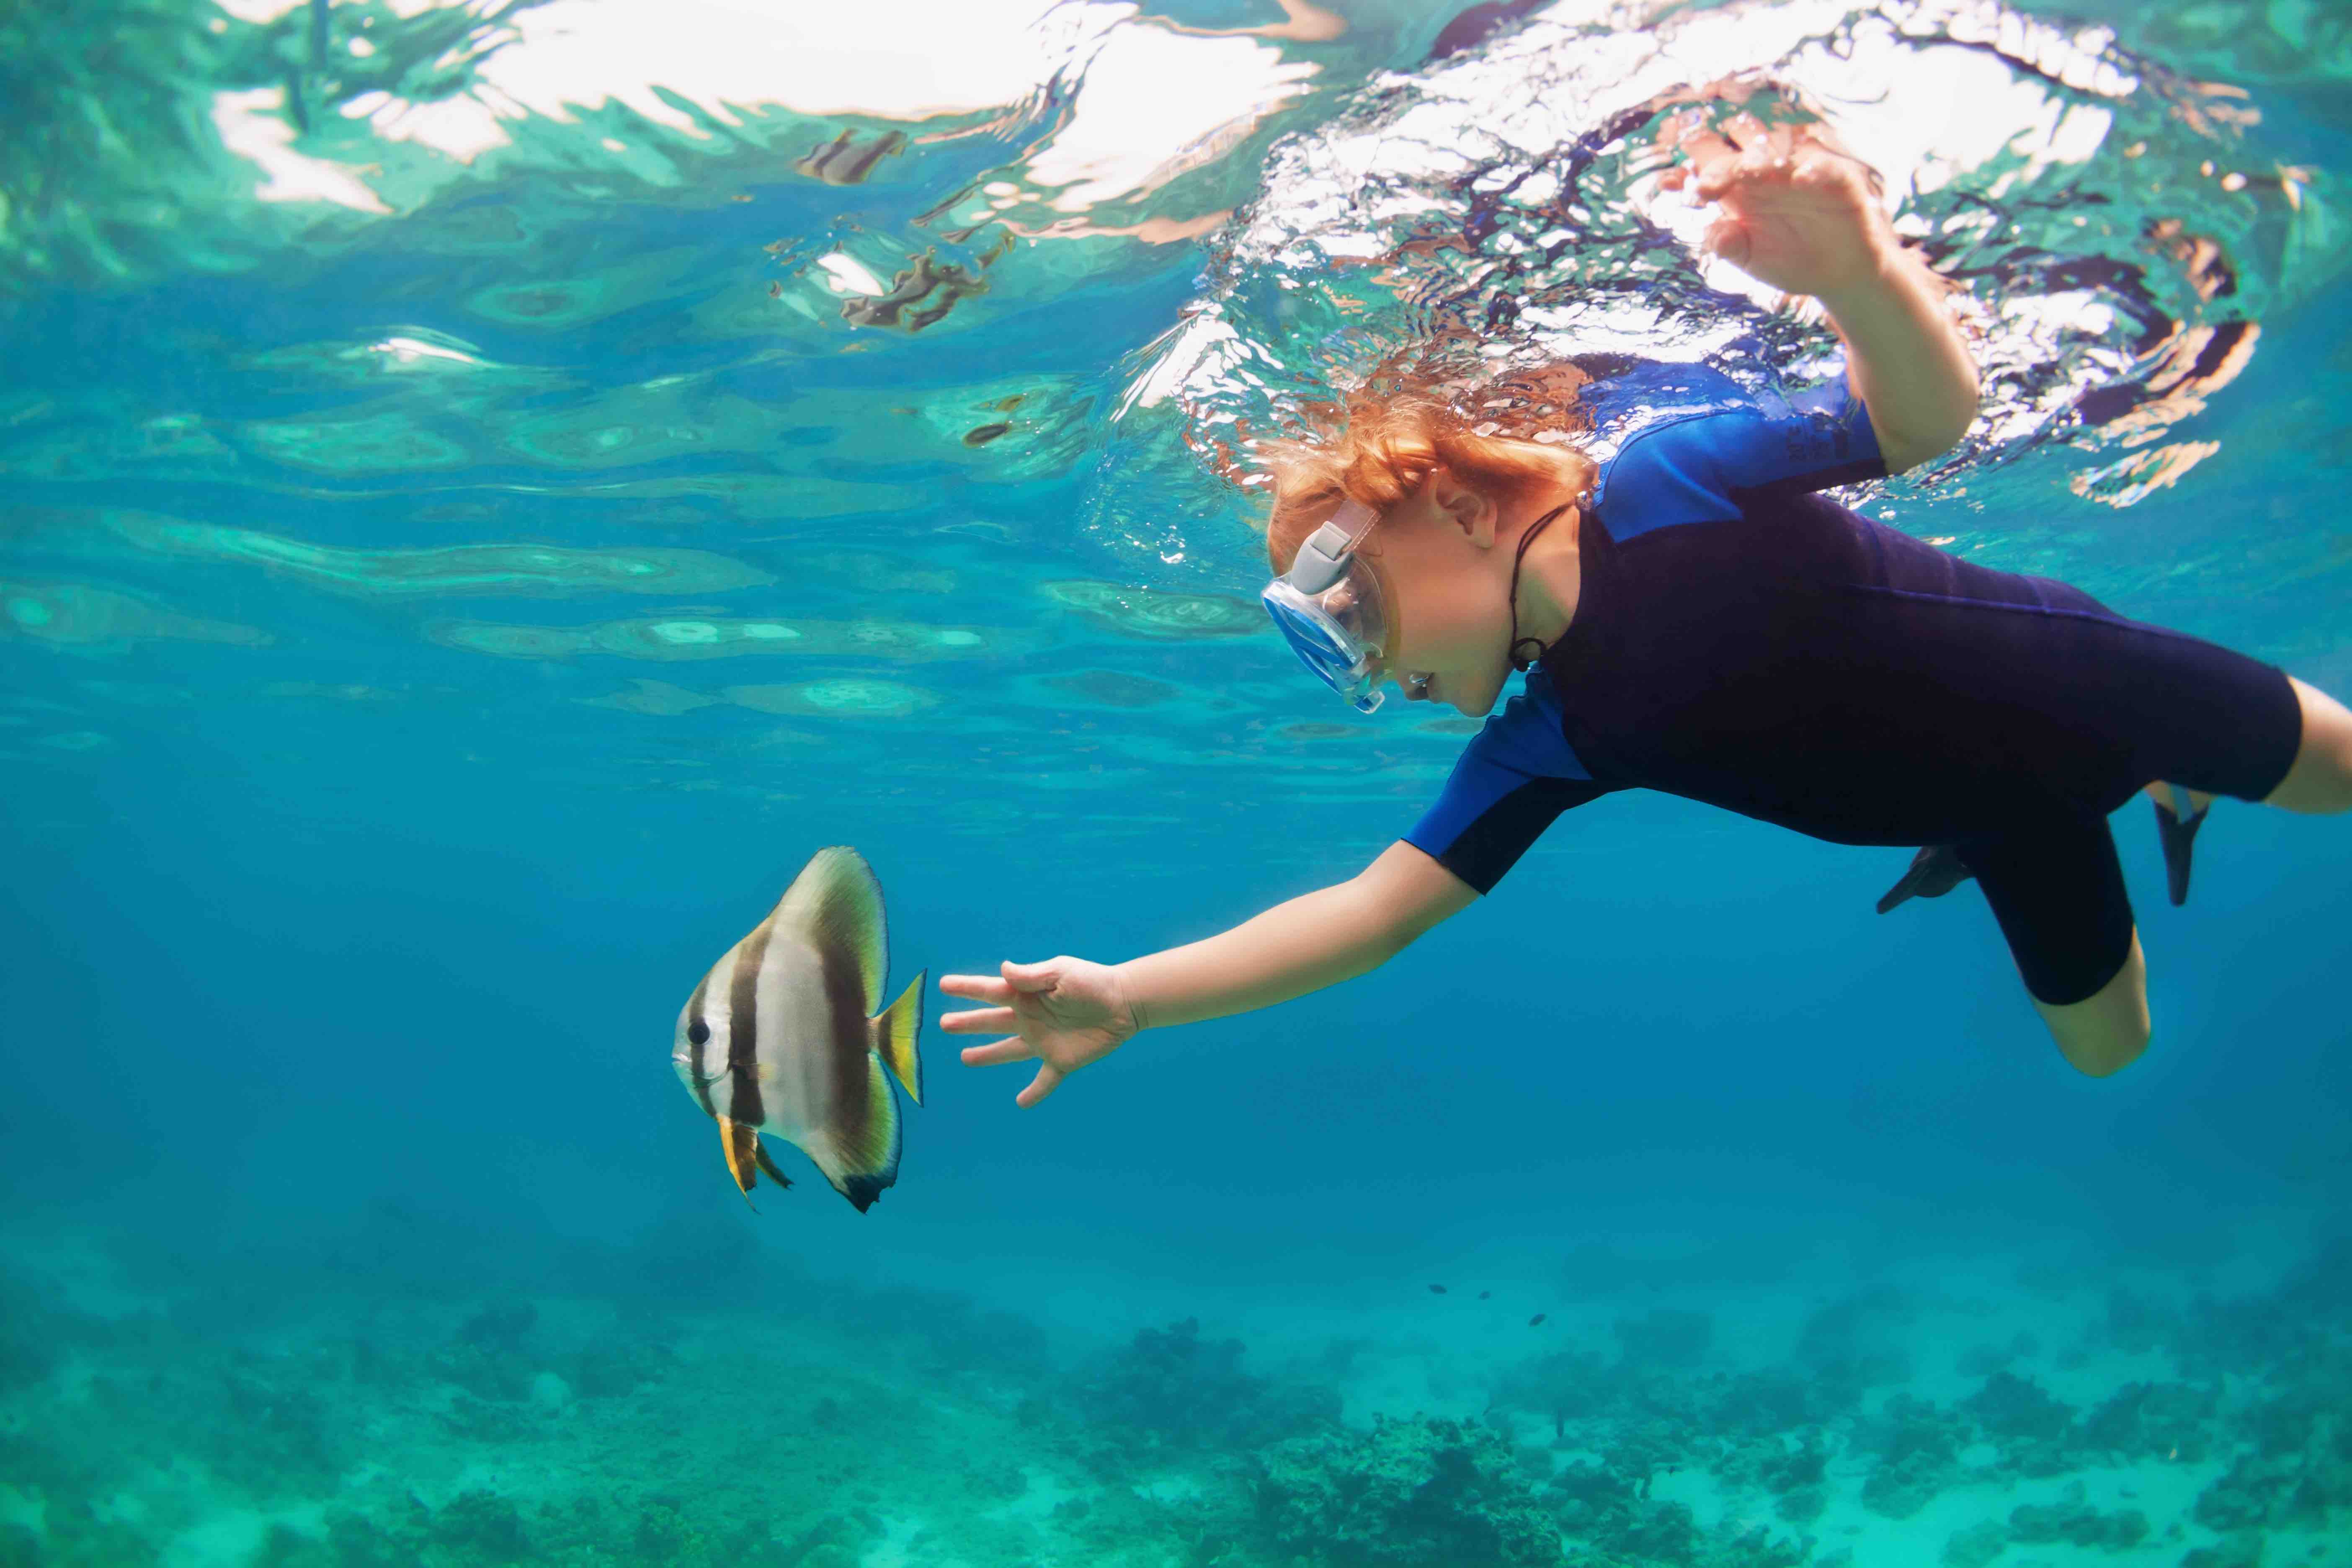 Young child in a snorkeling mask, swimming underwater and reaching for a tropical fish